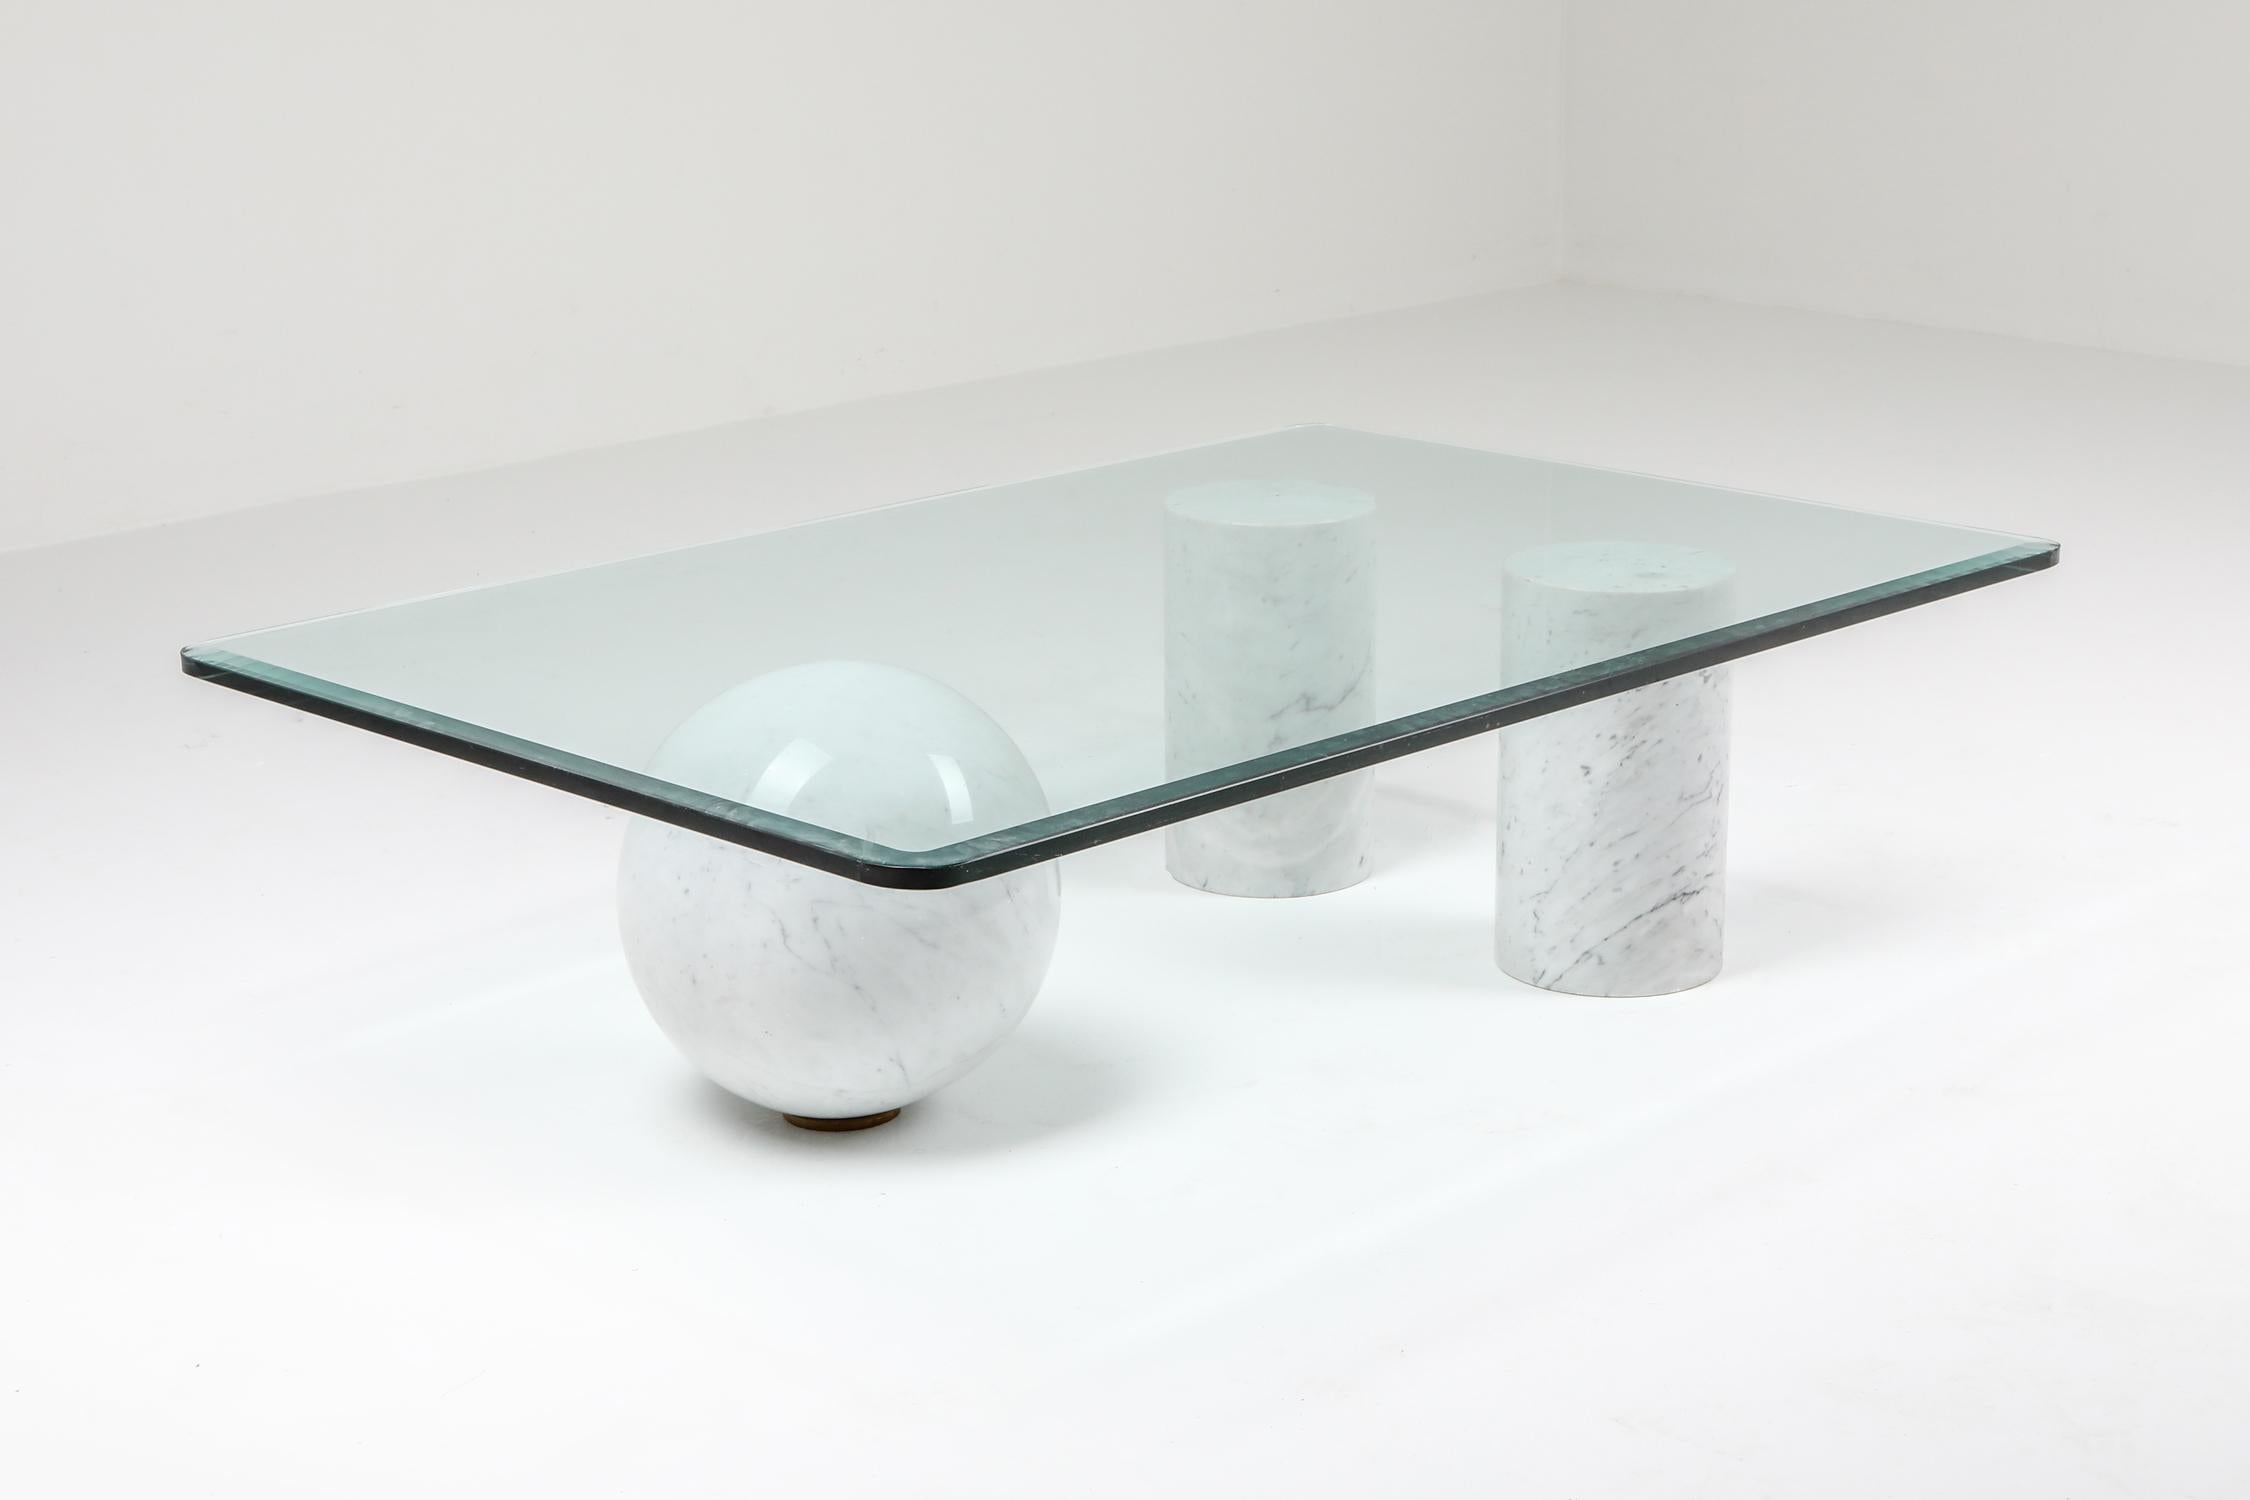 Post-modern Italian coffee table designed by Massimo Vignelli for Casigliani. This features a marble sphere and two cylinders, on which a 1/2” thick glass top rests. 
Quite a dynamic use of Carrara marble and shapes

The combination of precious